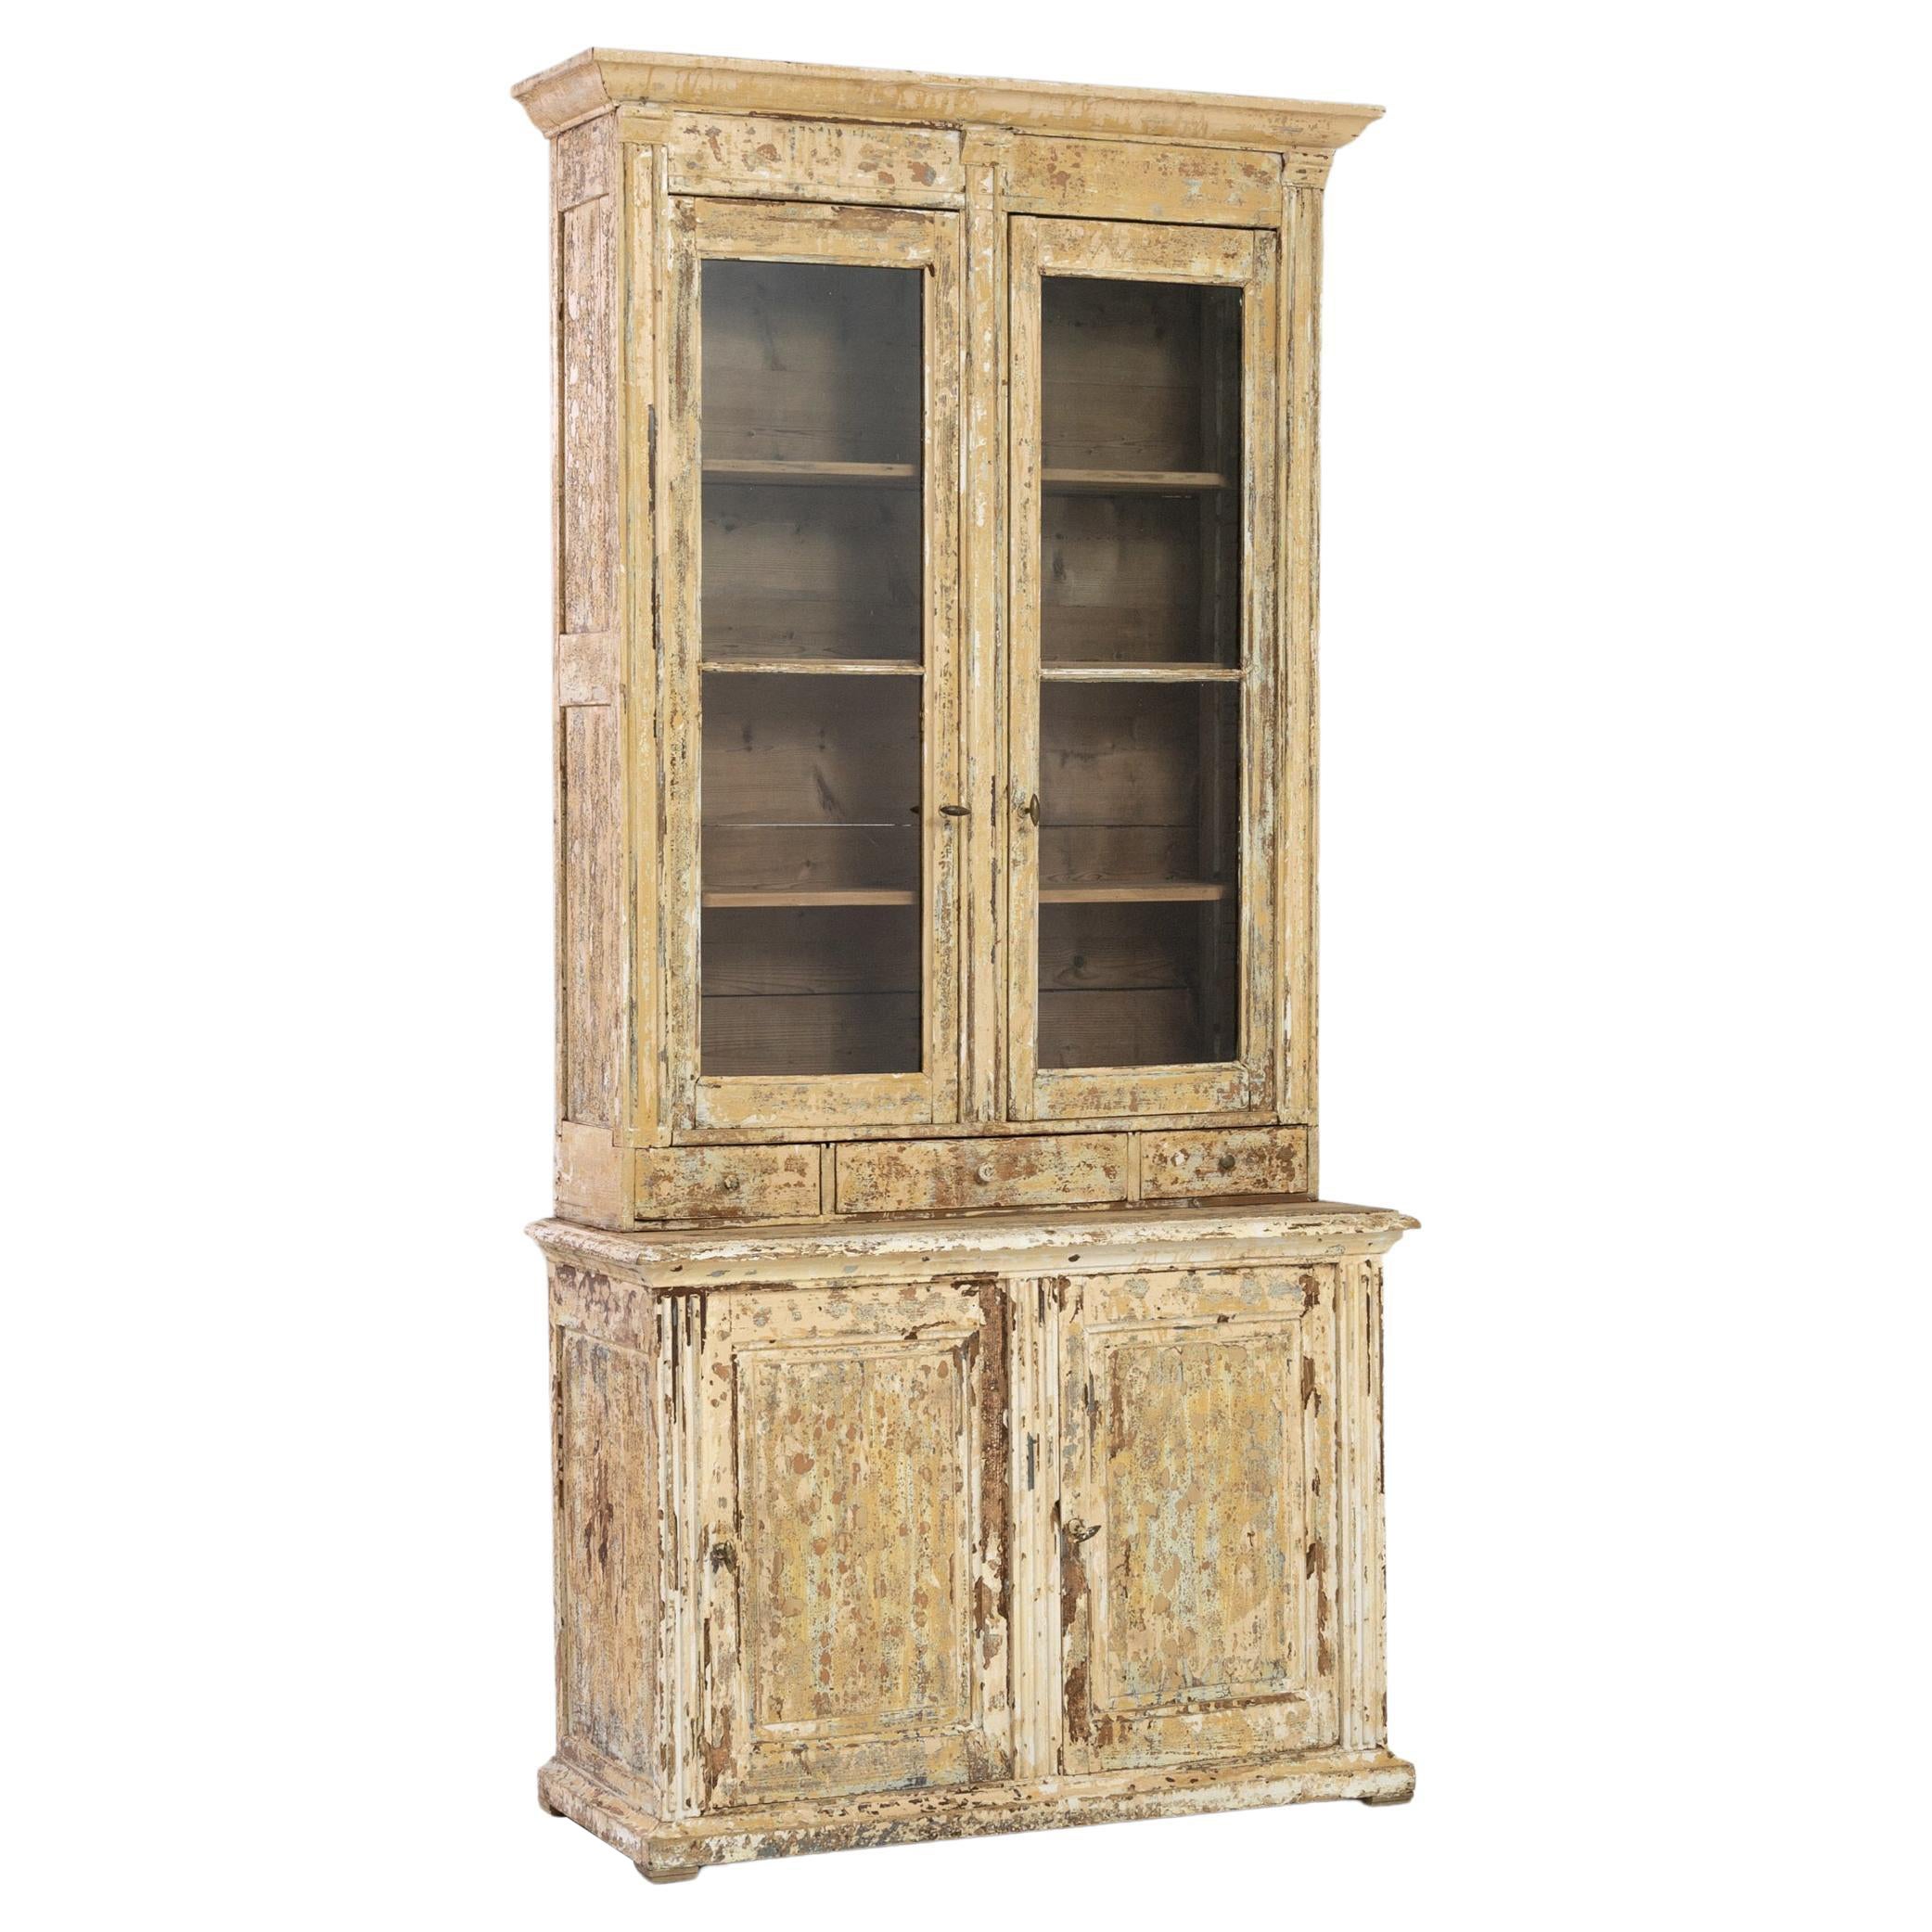 Early 20th Century French Patinated Vitrine